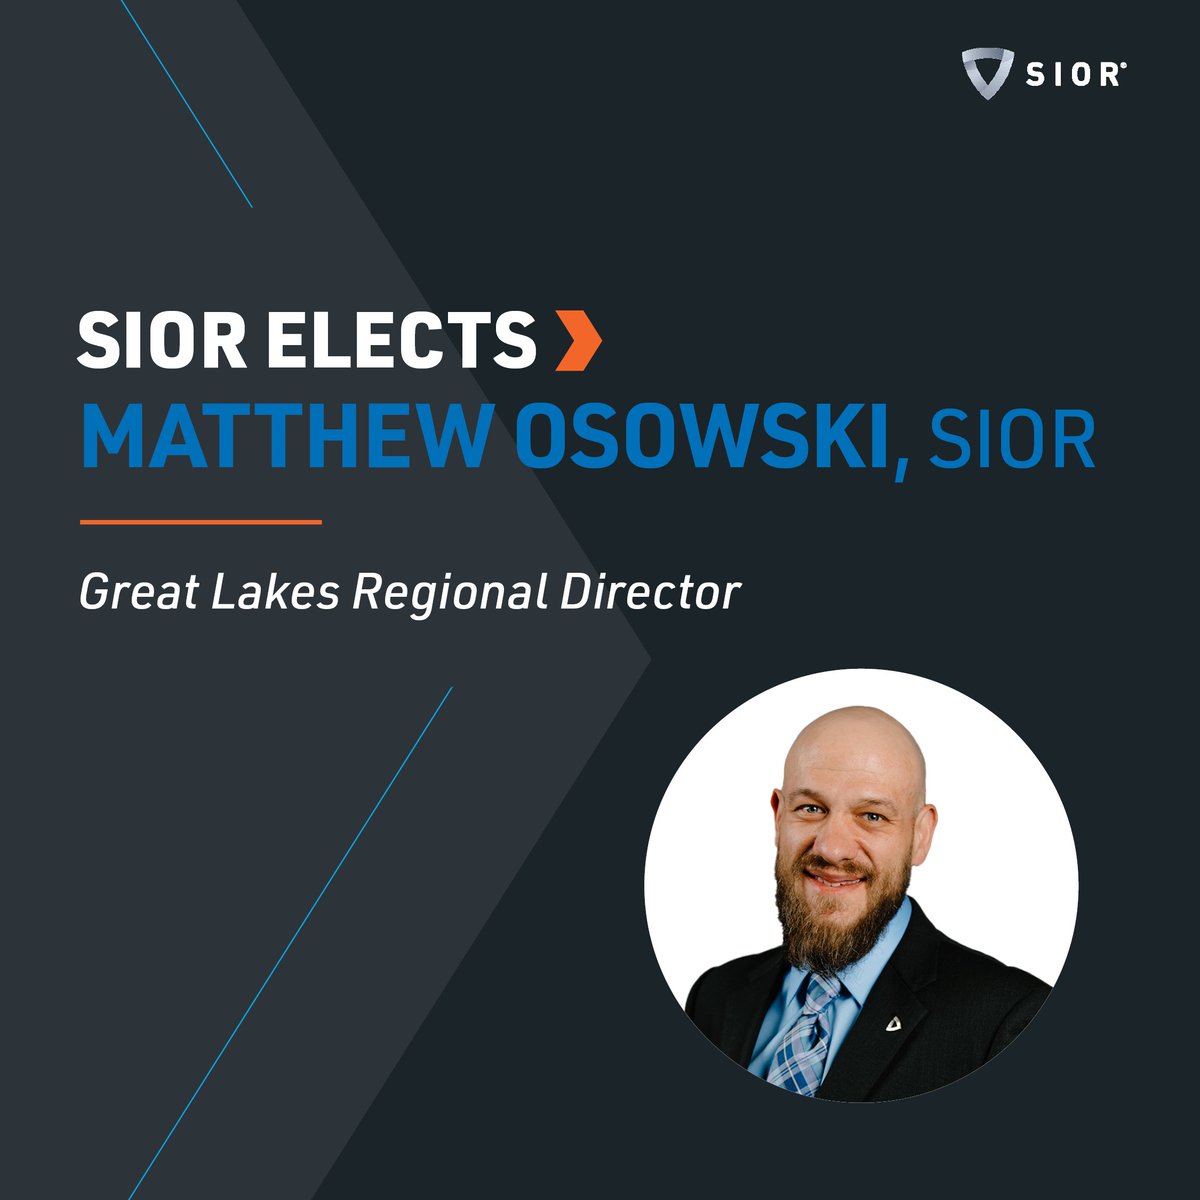 The #SIOR Great Lakes Region has a new leader at its helm! Congrats to Matthew Osowski, SIOR, for his election to serve as Regional Director. Specializing in sales & leasing, Matt is excited to contribute his market knowledge & expertise when he assumes his new role this fall.